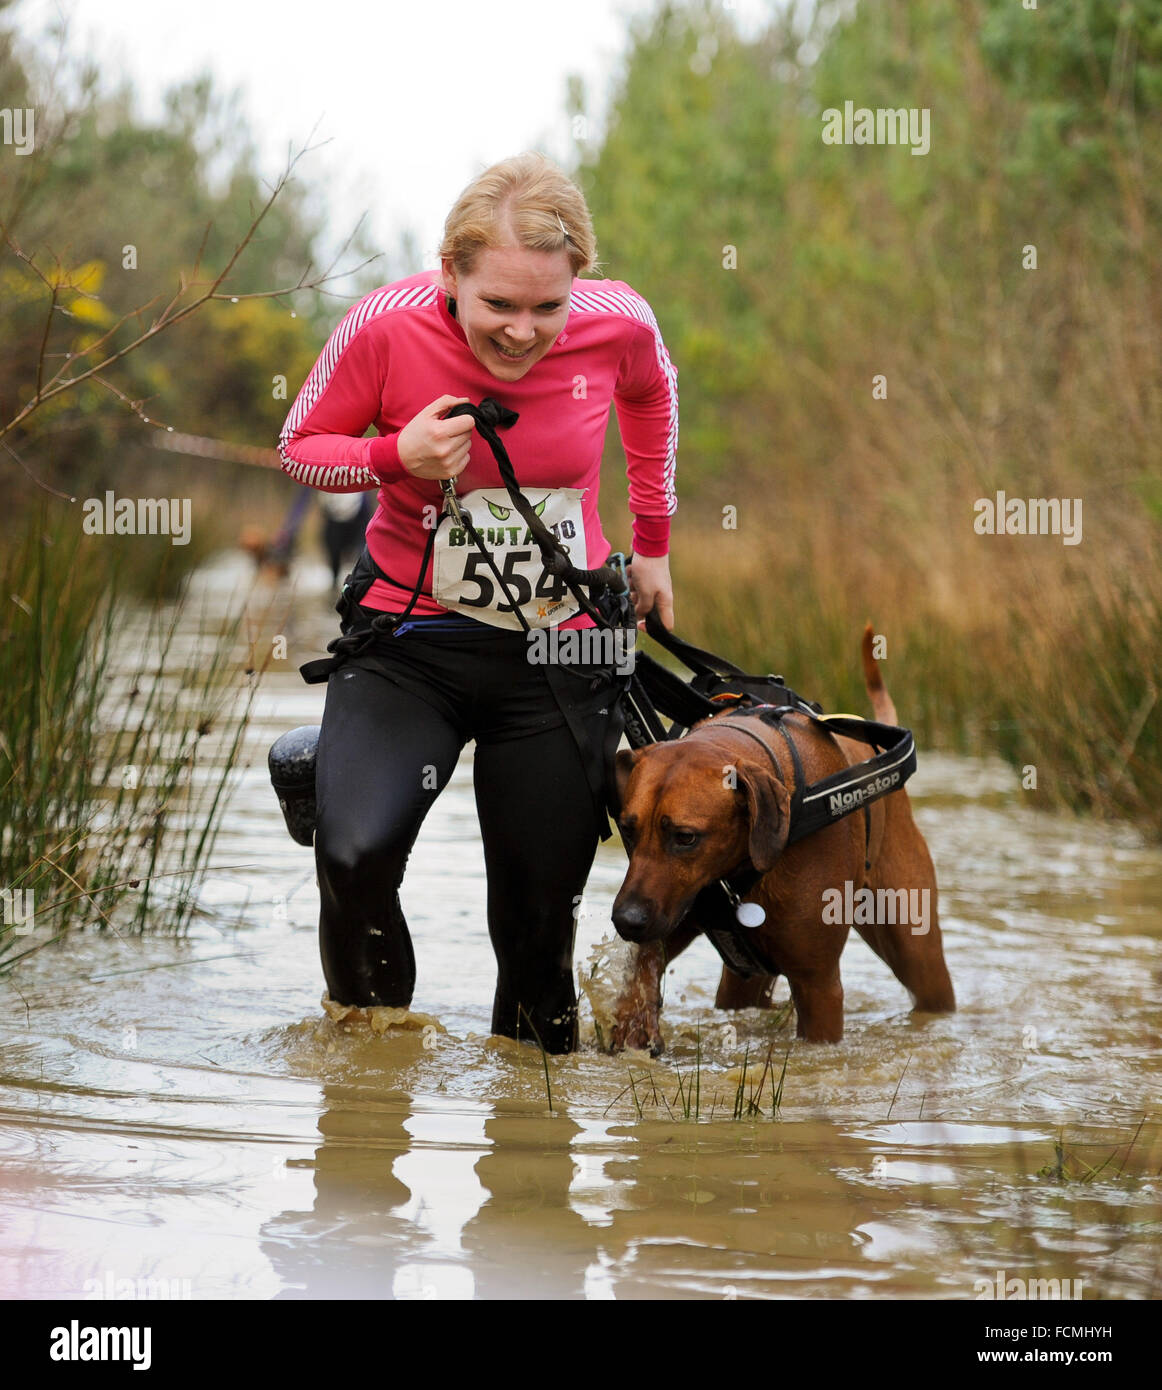 Aldershot, Hants, UK. 23rd January, 2016. Participants  struggle through the flooded streams of the Brutal women only  10km canicross race at Long valley Aldershot Hampshire having to break the ice as the make there way around the course .  The recent weather made the Brutal 10km off road course live up to its name as the puddles and streams where up to waste height in many places with early runners having to break the ice as they entered the water.  Credit:  PBWPIX/Alamy Live News Stock Photo